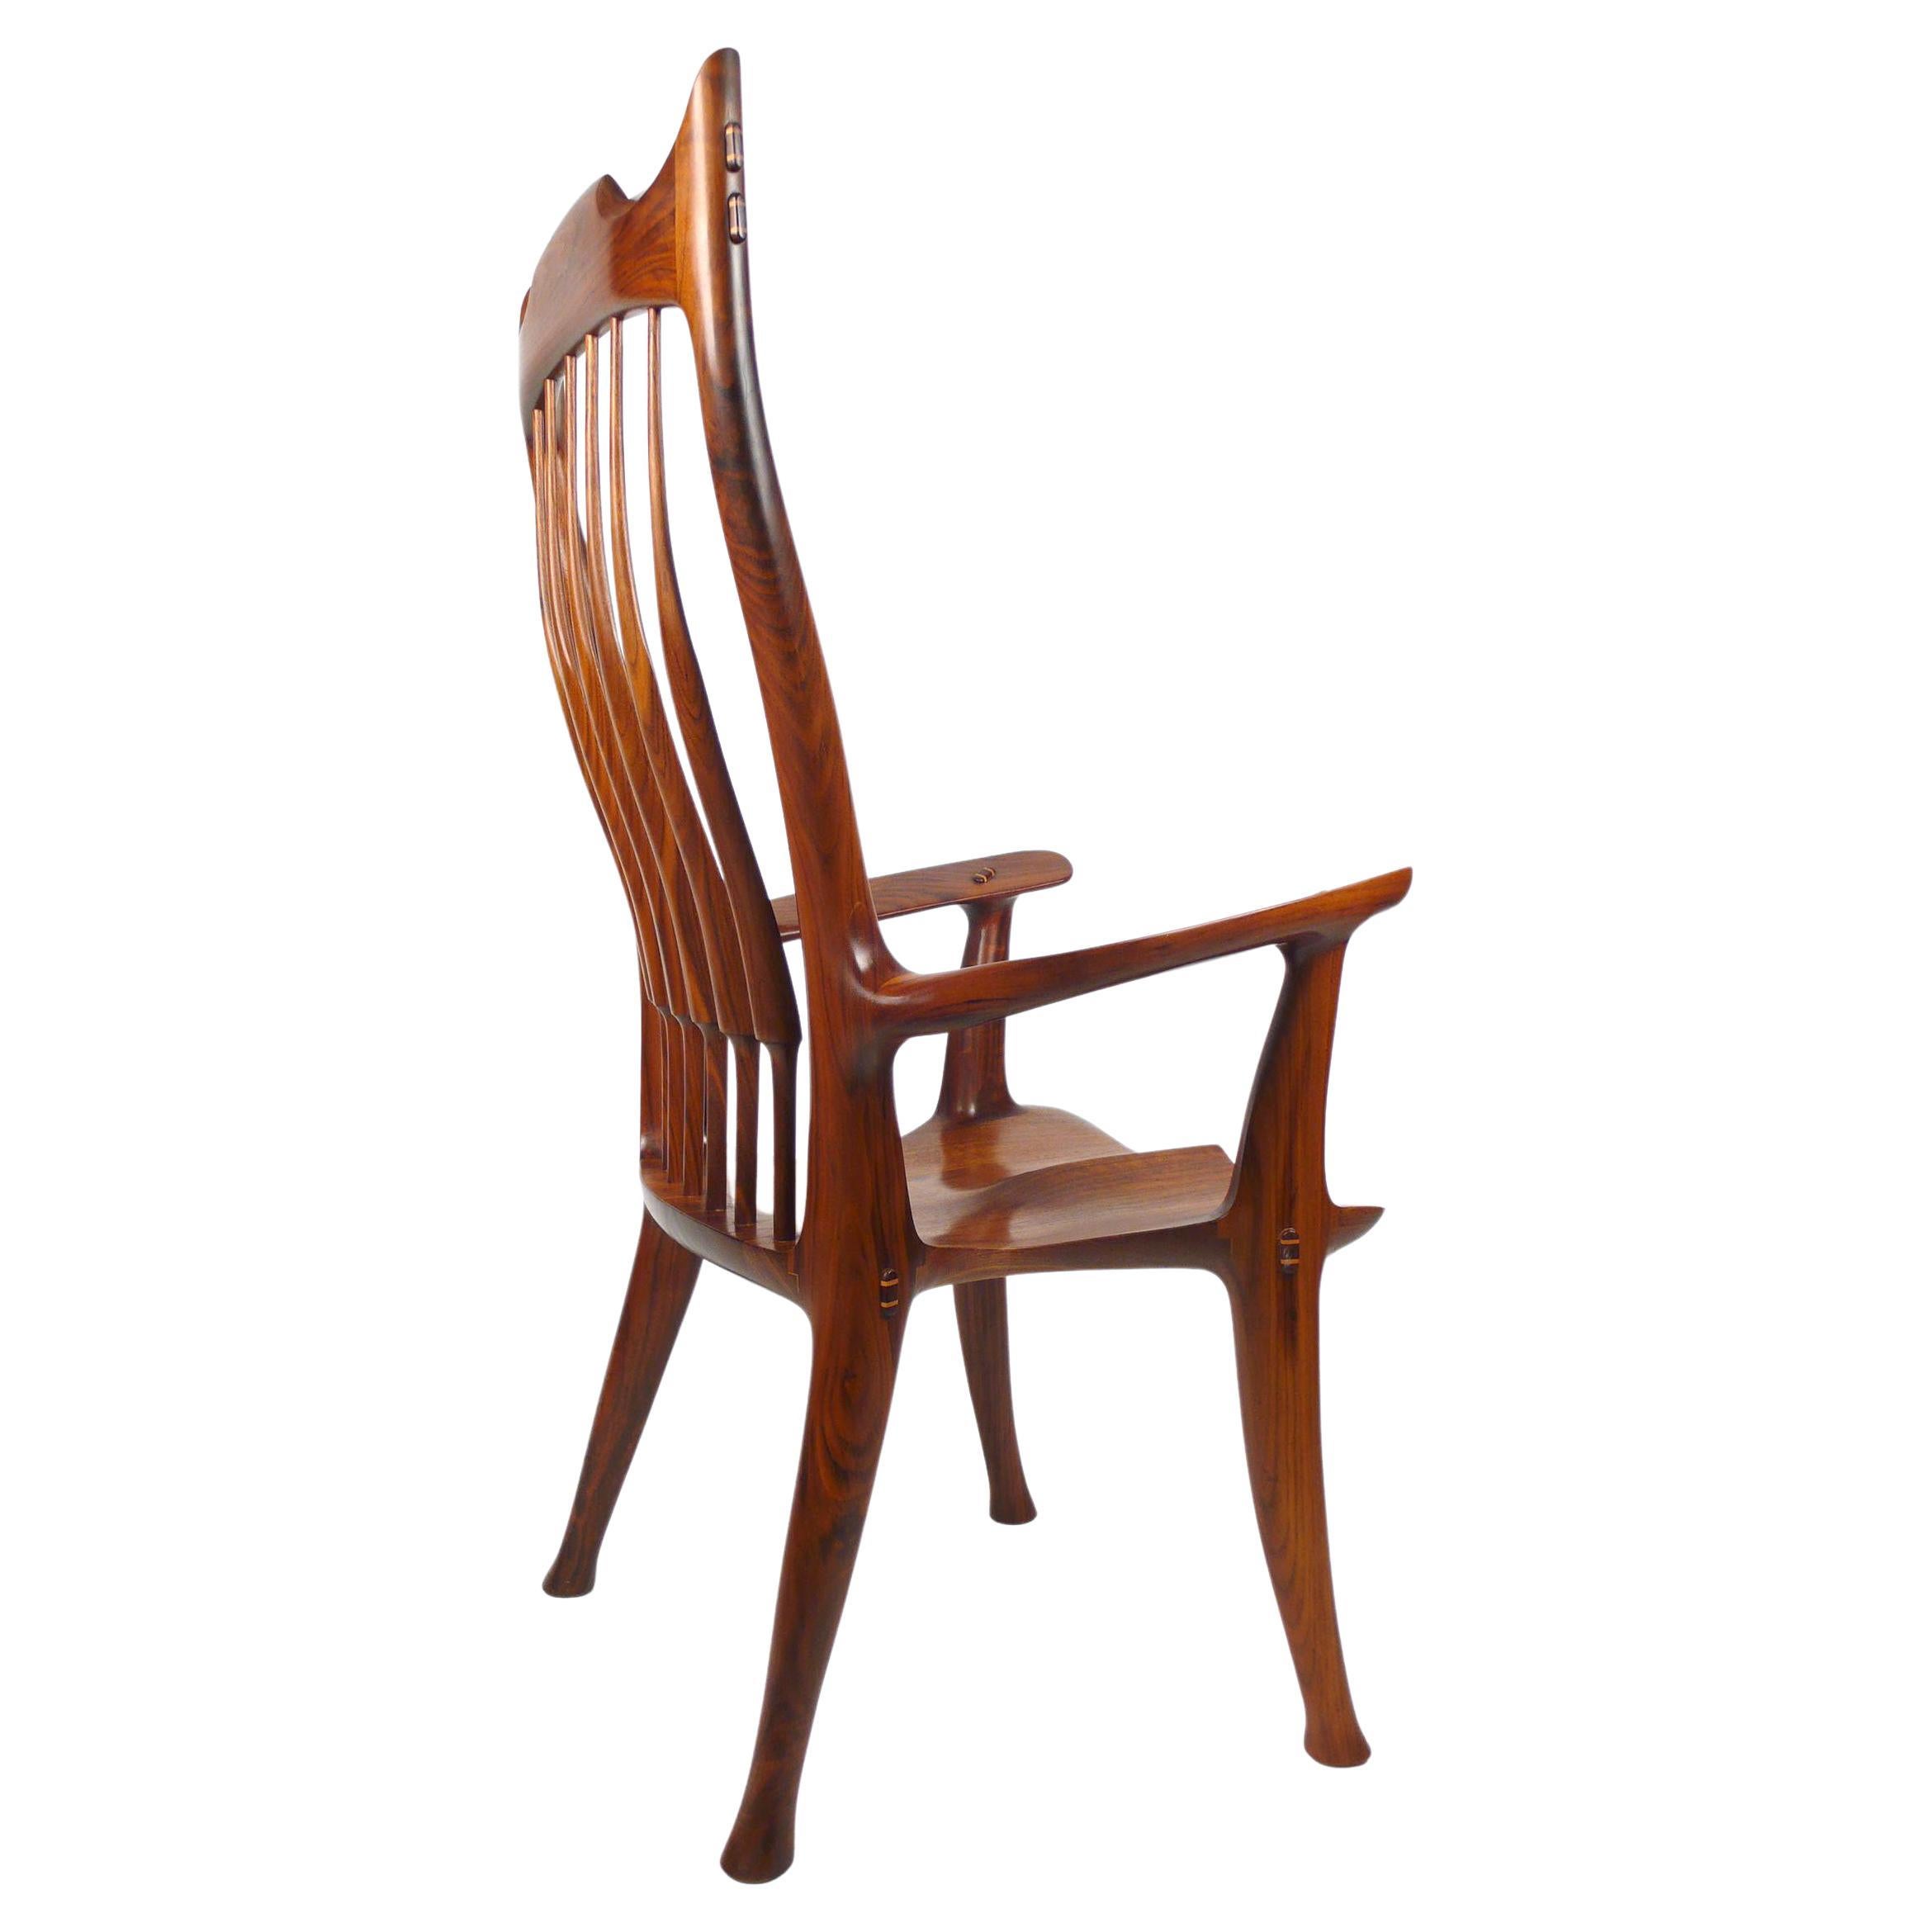 Dave Hentzel American Craft Solid Walnut Arm Chair, Apprentice to Sam Maloof For Sale